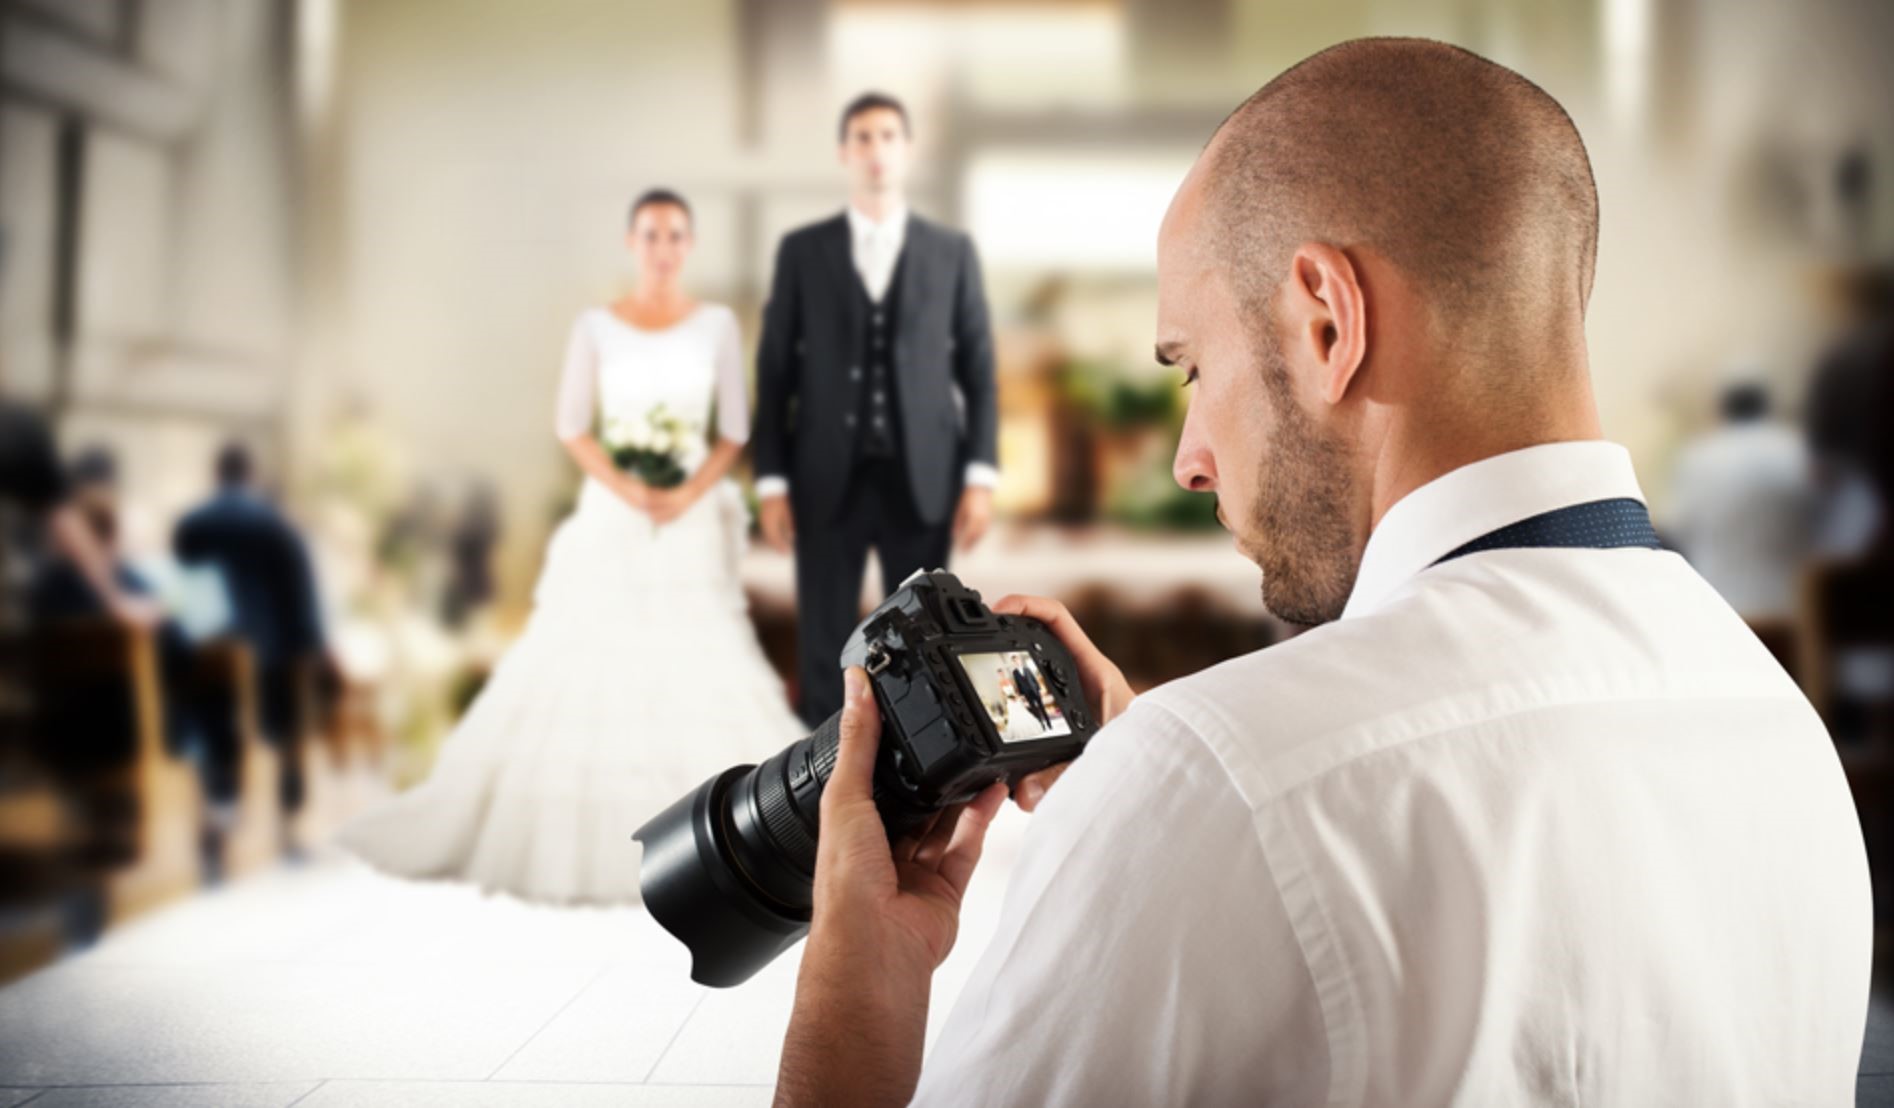 Wedding Photography: A Complex Job Best Left to the Pros